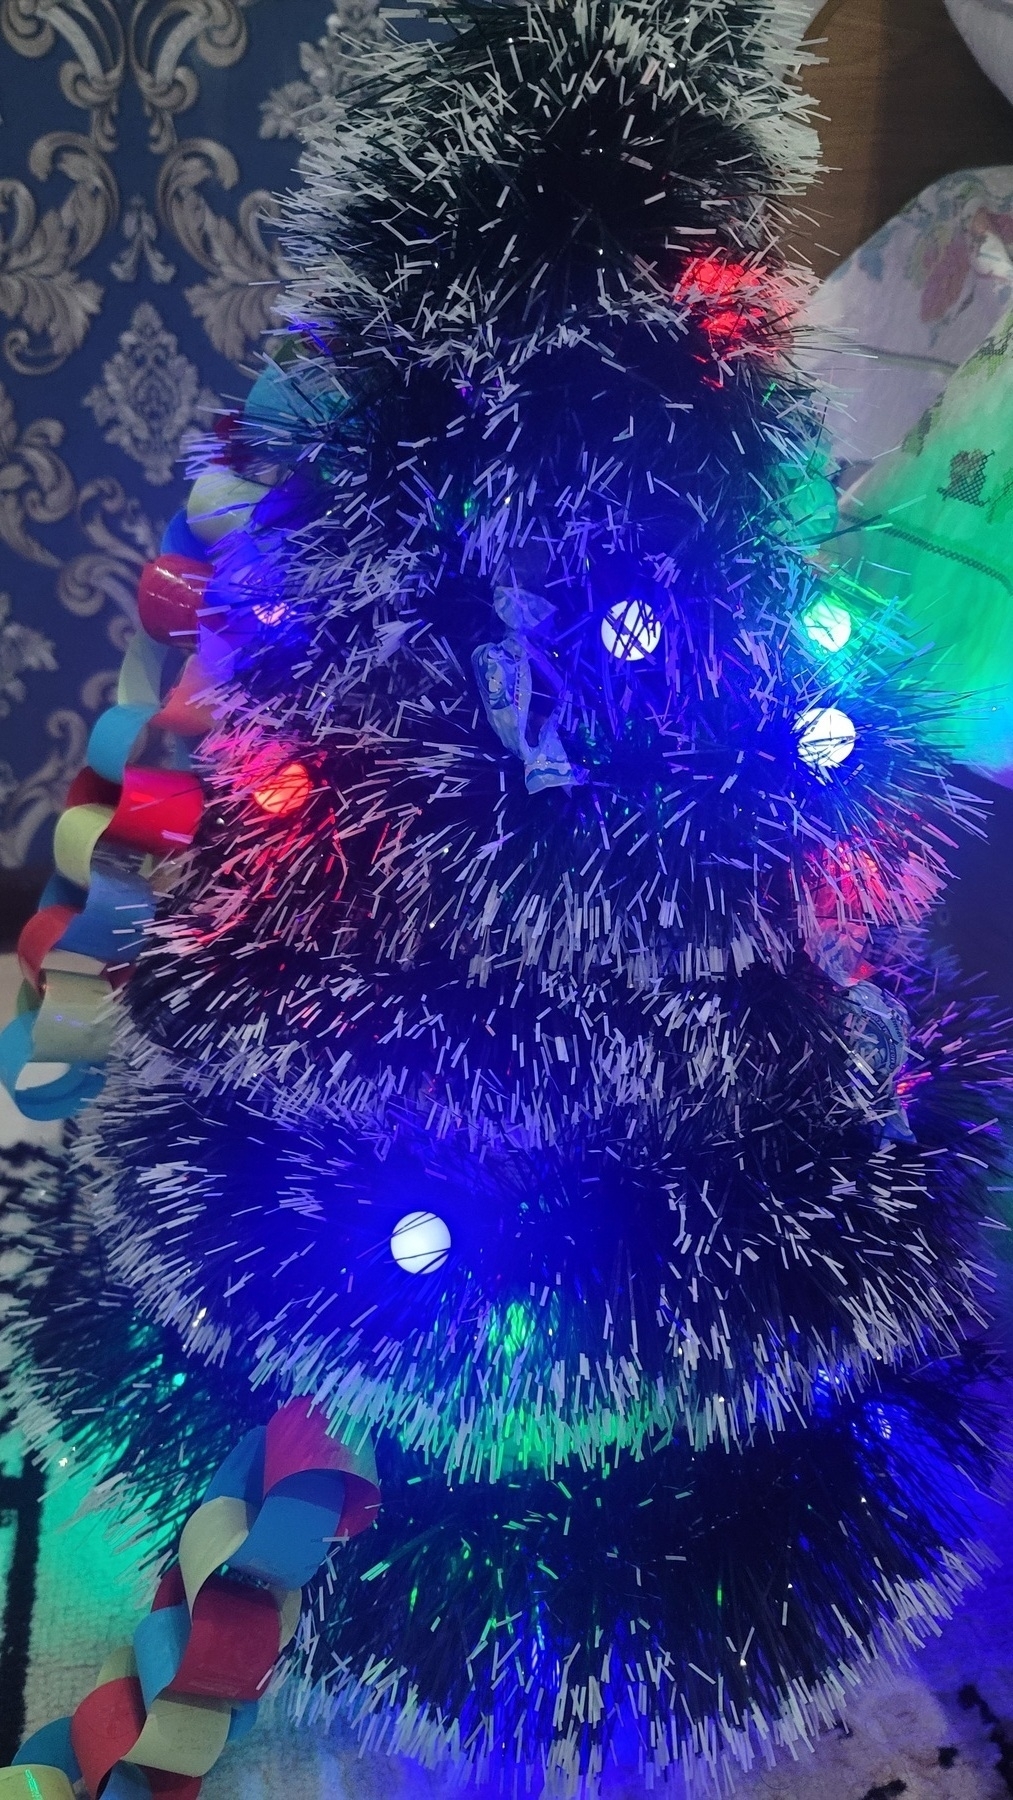 Christmas tree made of a dark garland with white ends and colorful lights wrapped around something